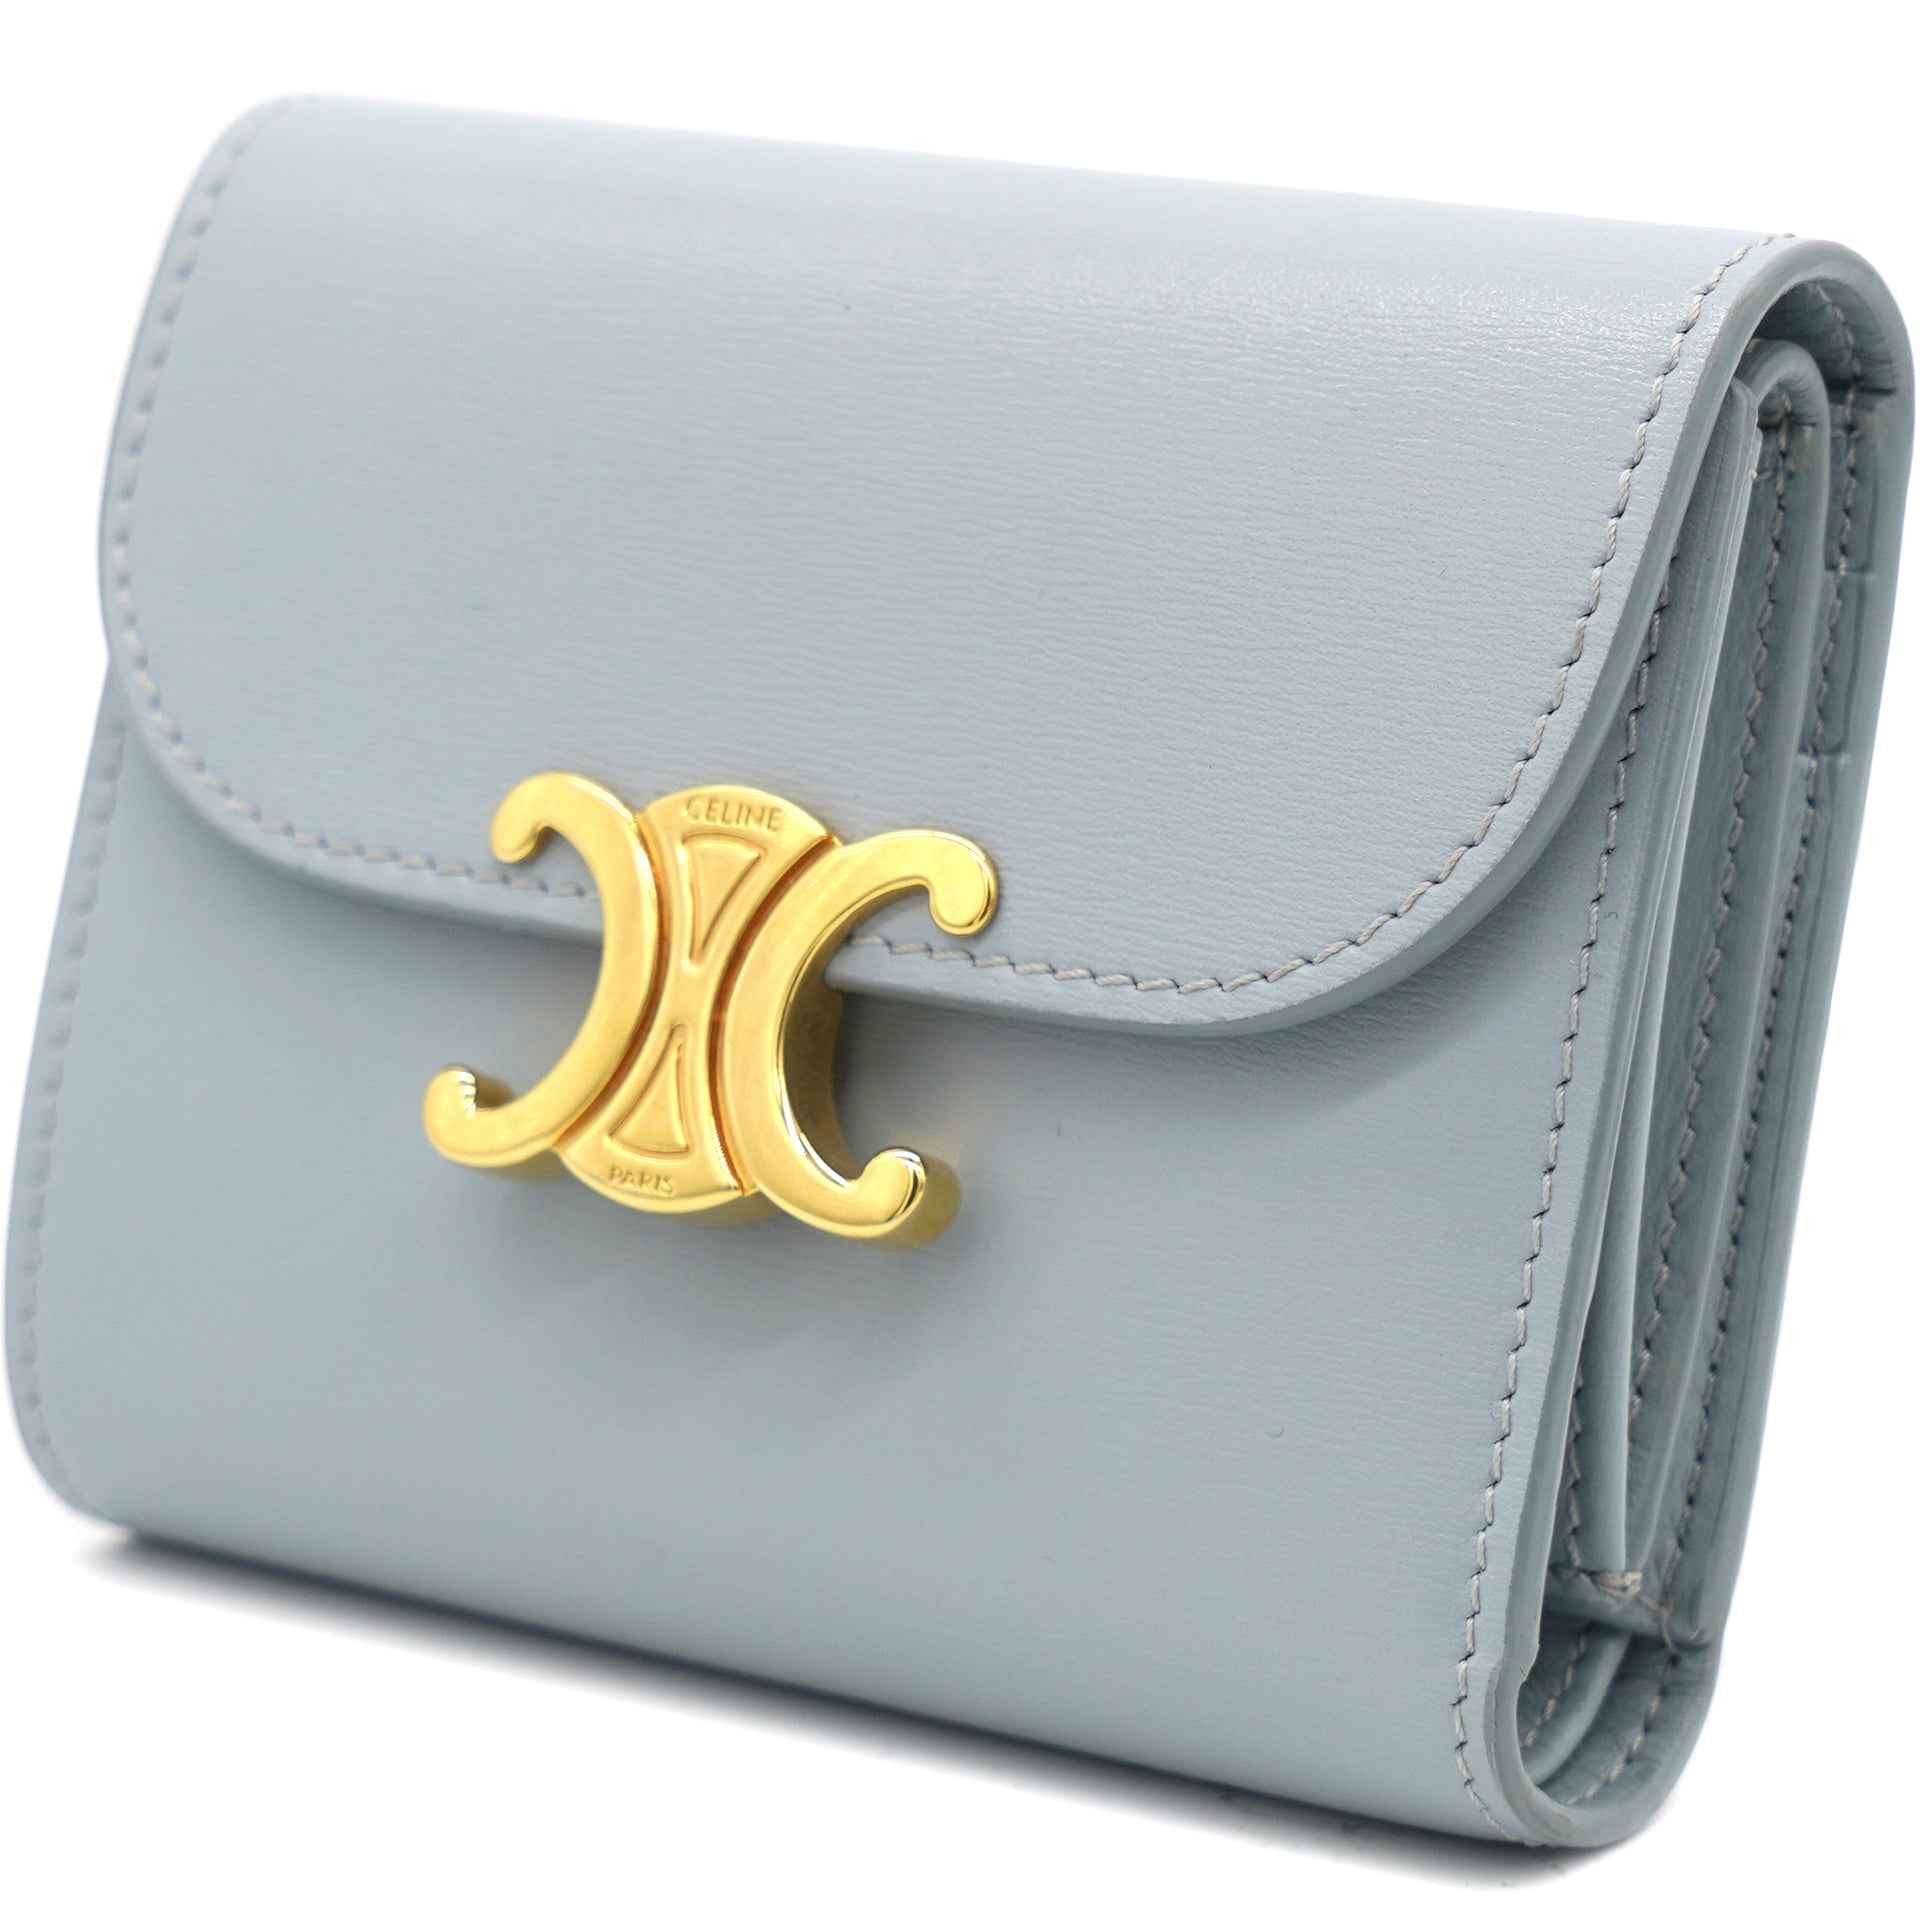 COMPACT ZIPPED WALLET CUIR TRIOMPHE IN SMOOTH CALFSKIN